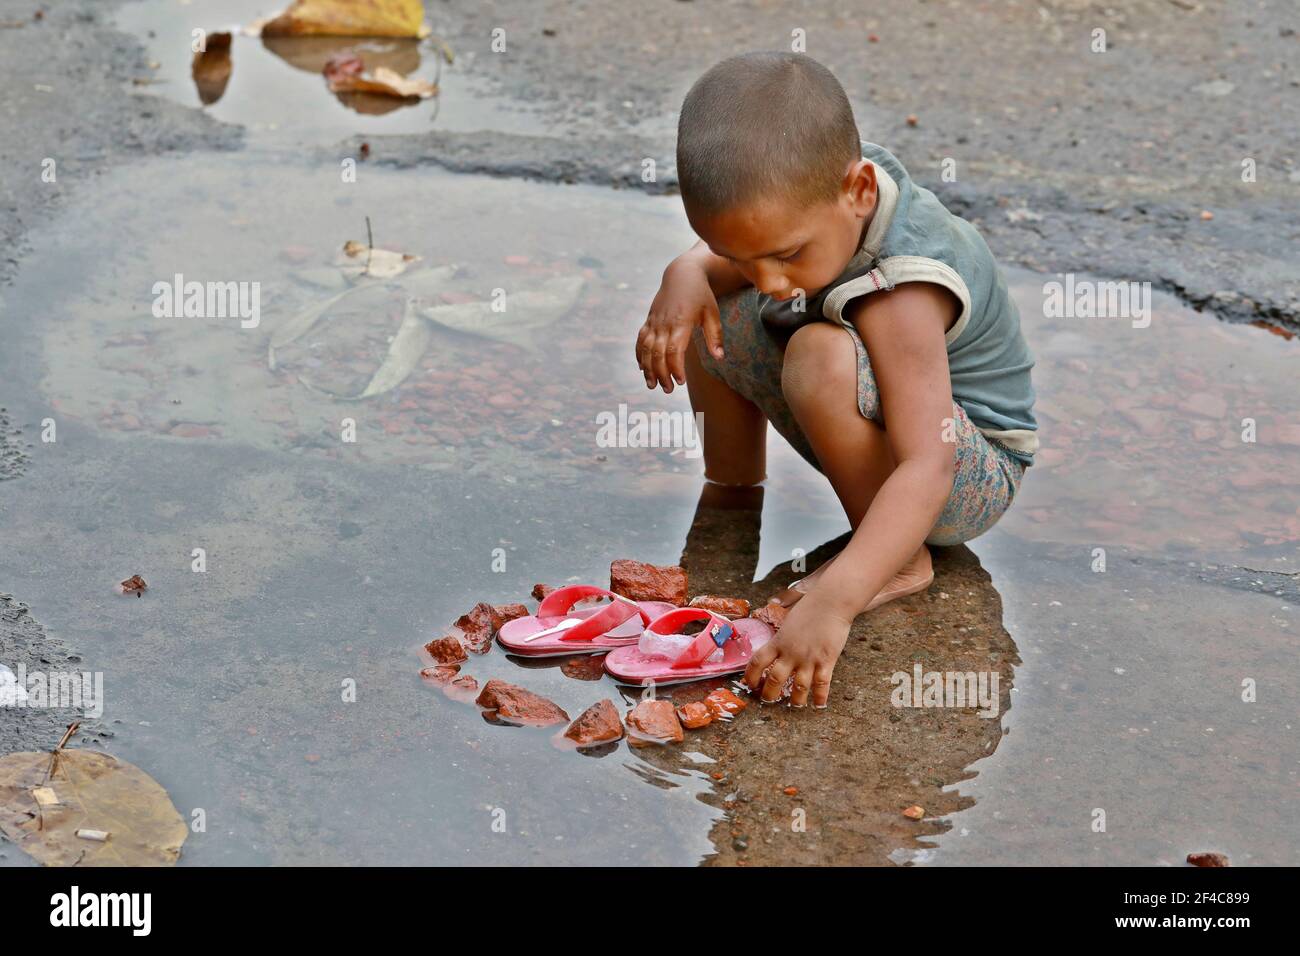 Dhaka, Bangladesh - March 20, 2021: A street child is playing in the frozen water in the Dhaka University area, Dhaka, Bangladesh. Stock Photo